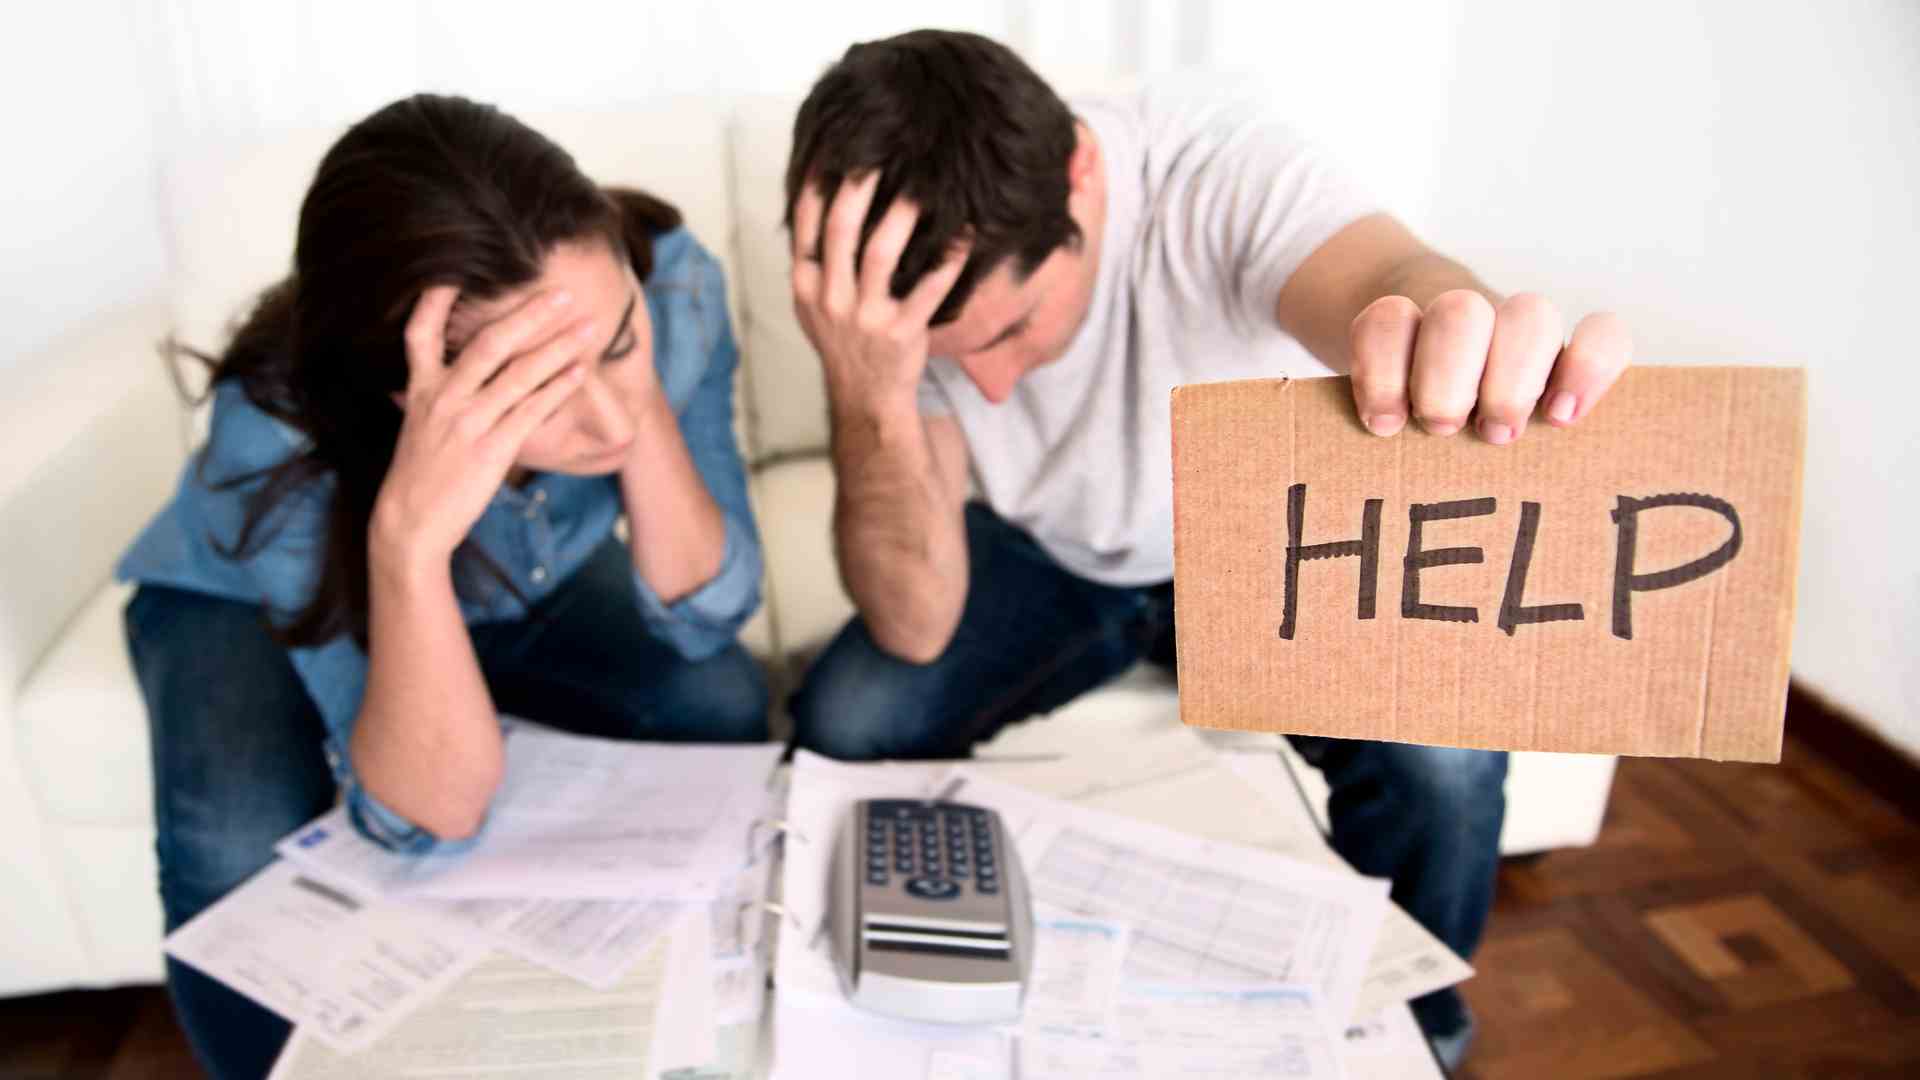 American Hope Resources: Ways To Help People Experiencing Financial Hardships